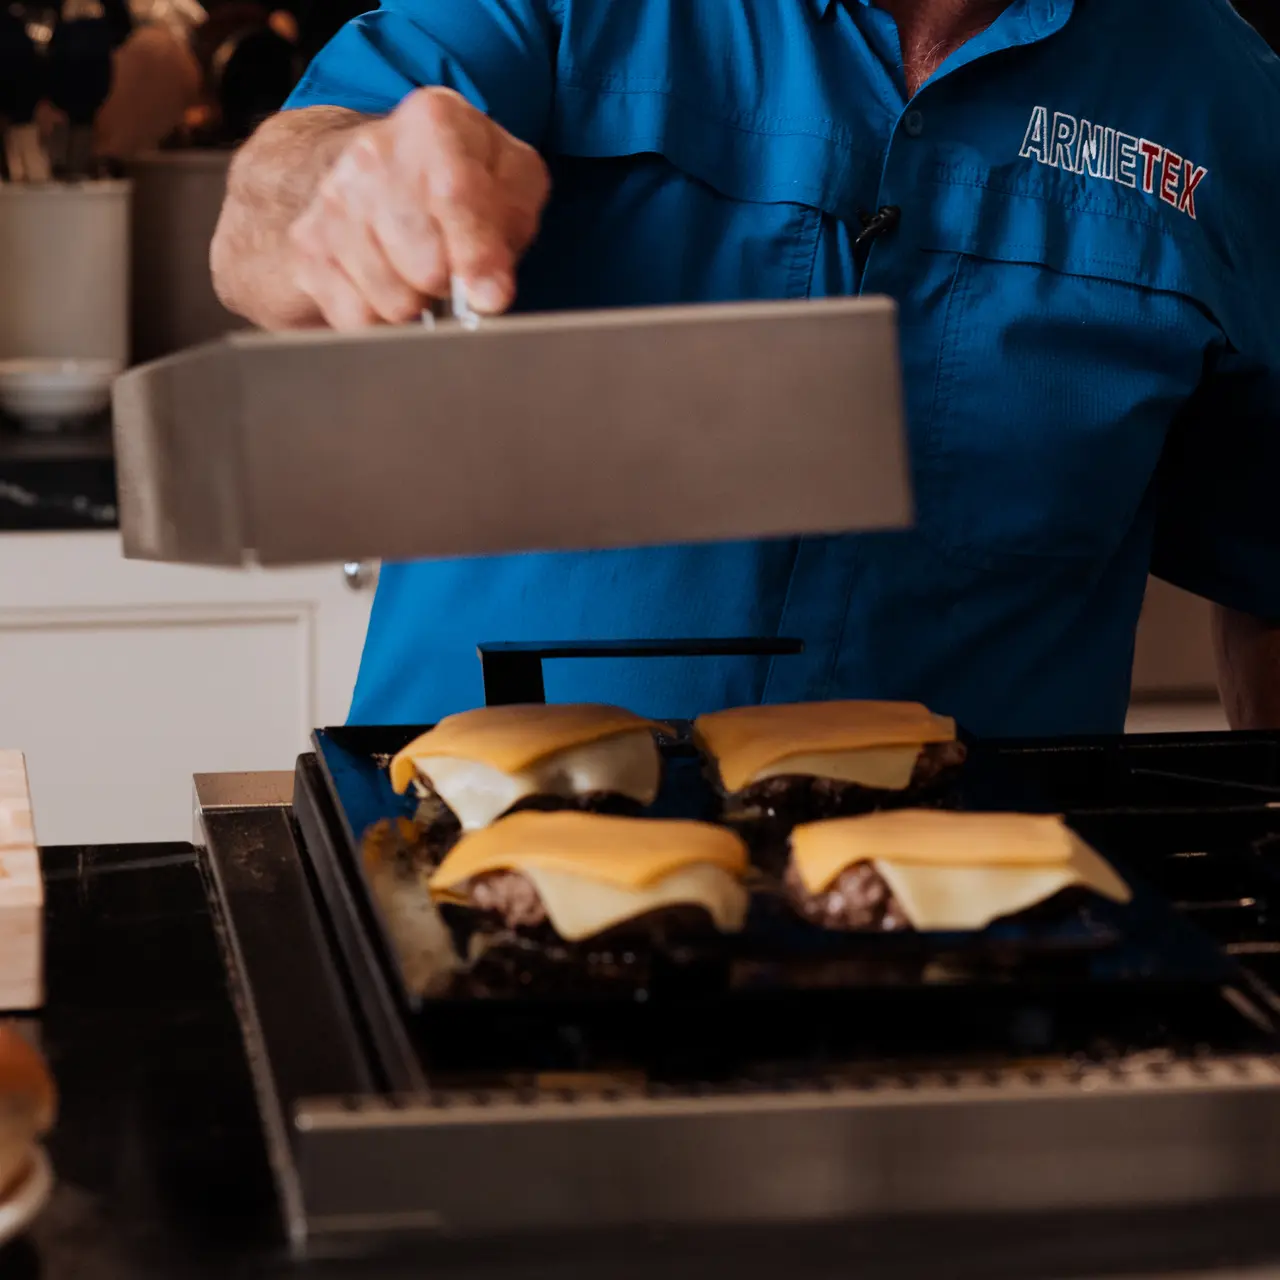 A person in a blue shirt cooks burgers with cheese on a grill using a large metal spatula.